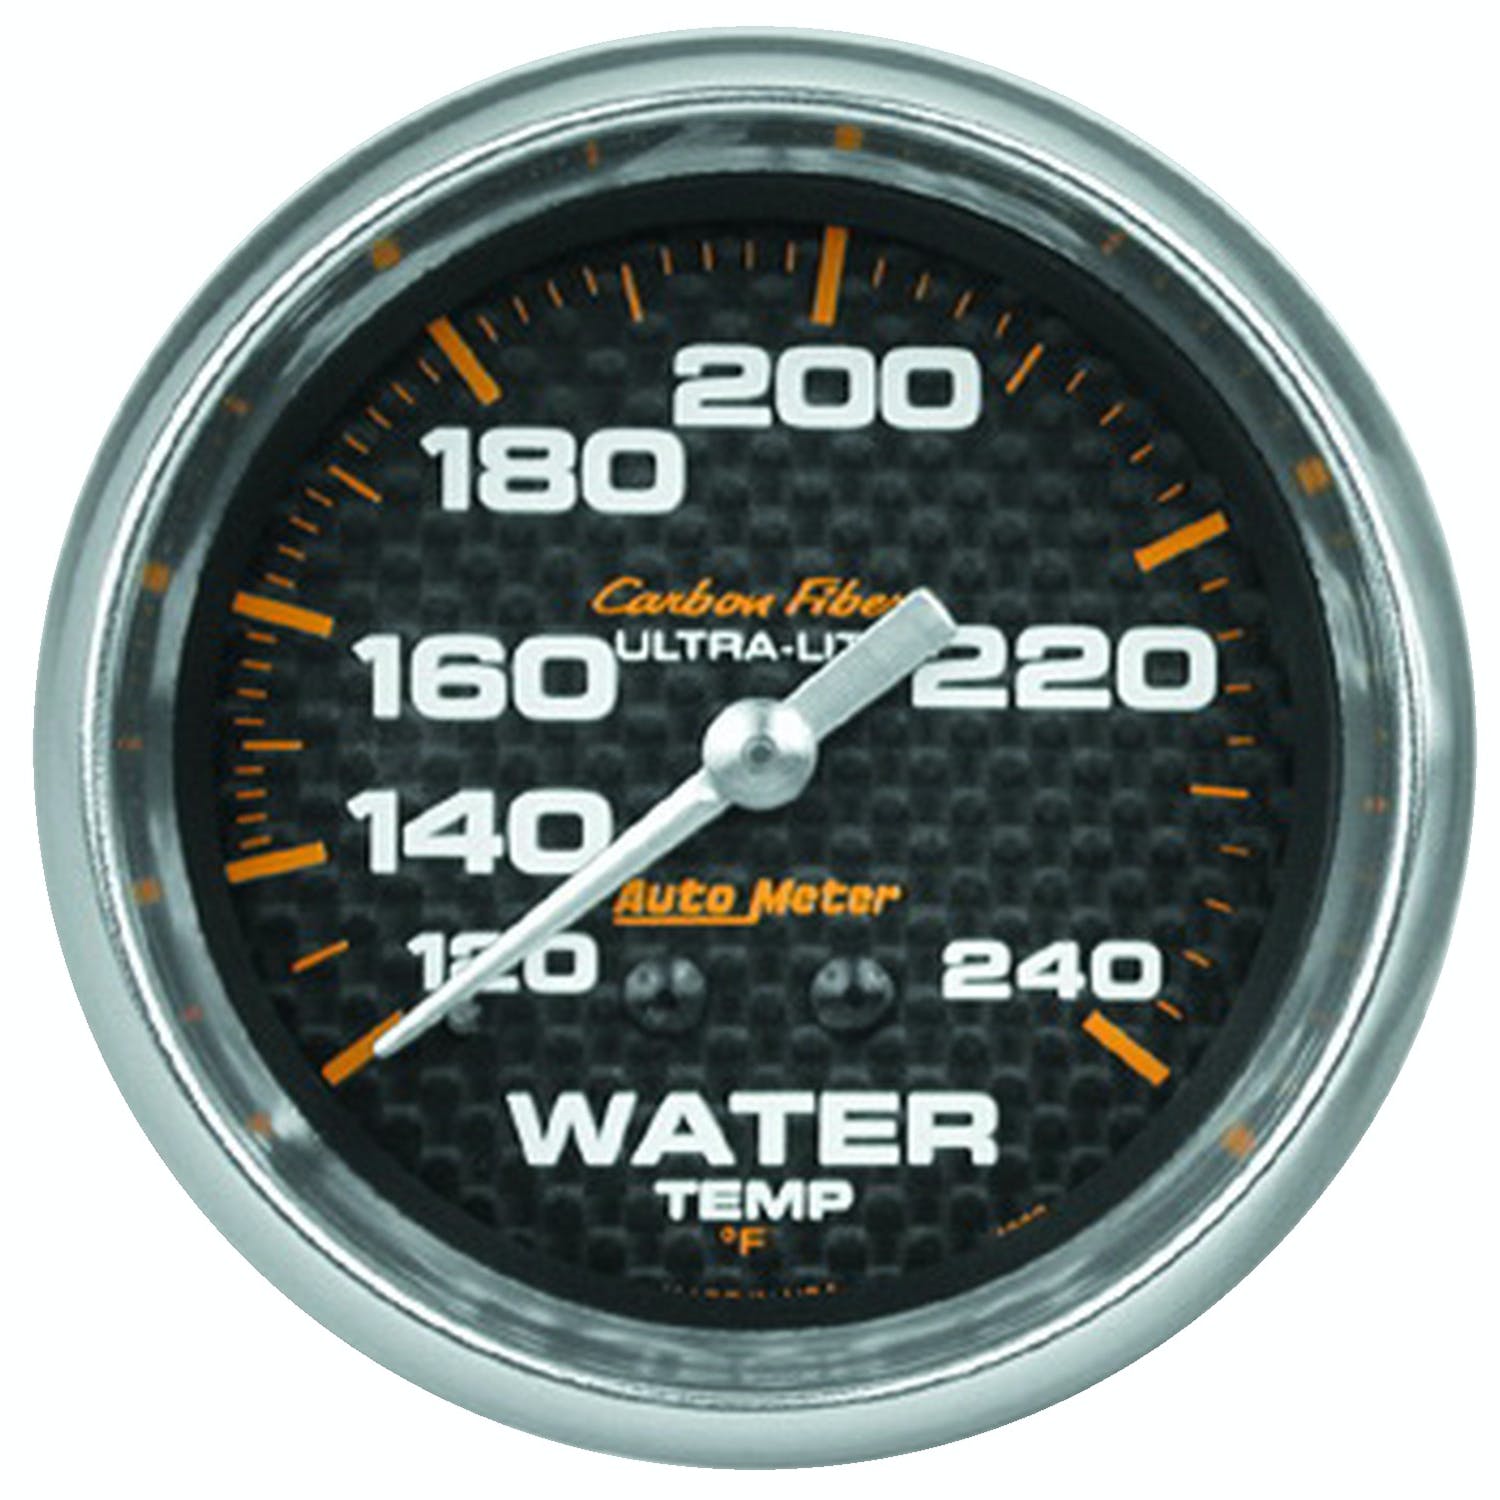 AutoMeter Products 4832 Water Temp 120-240 F